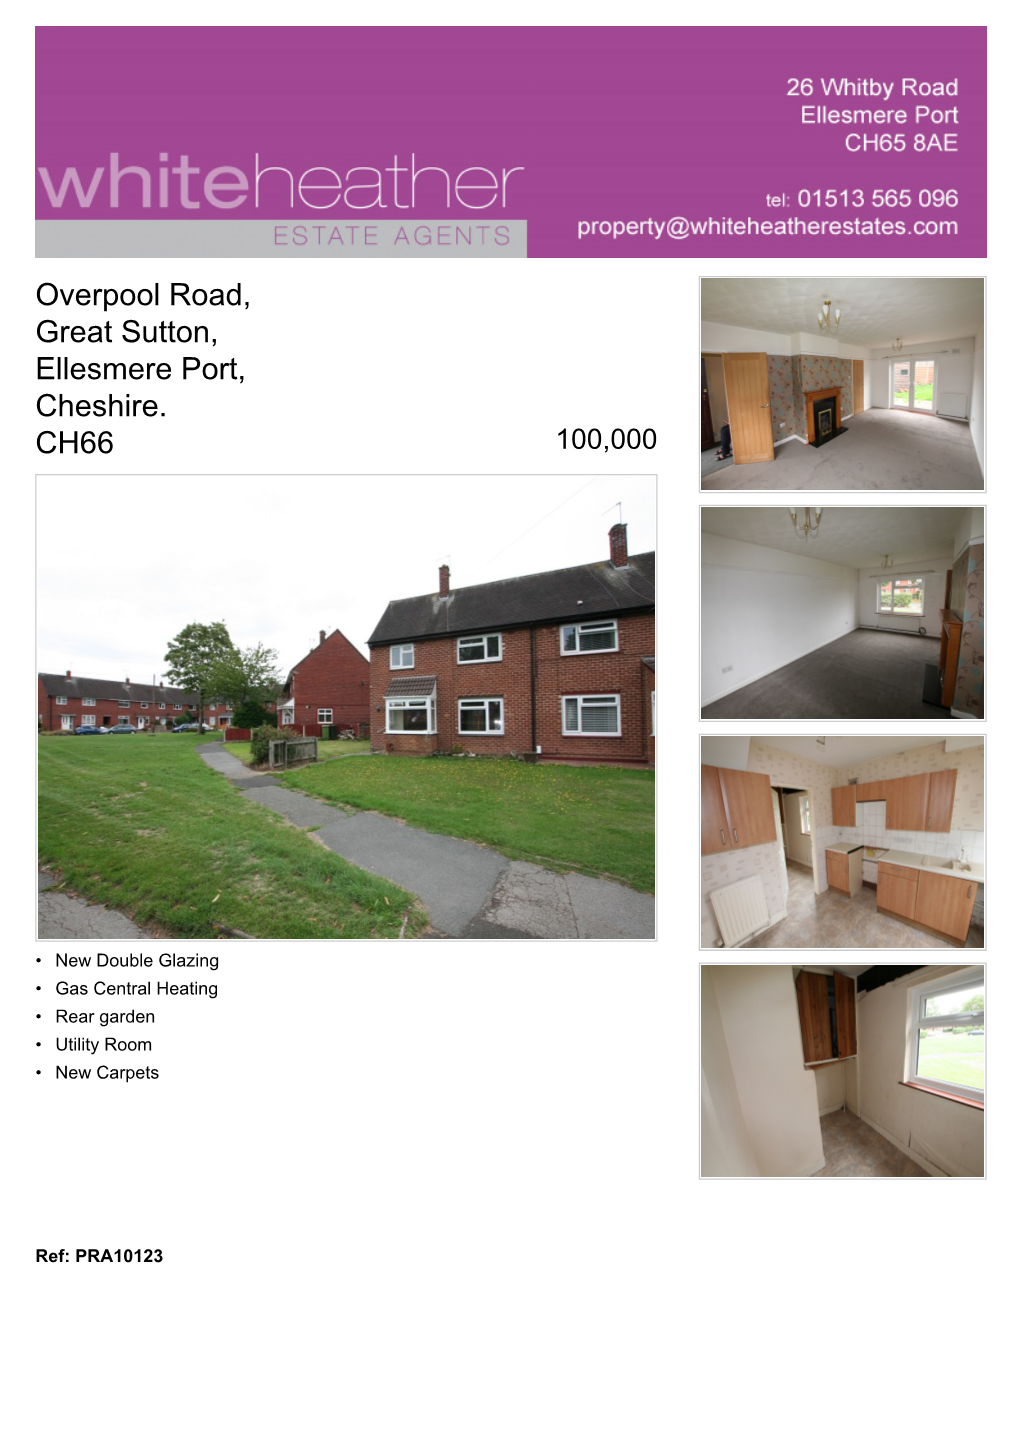 Overpool Road, Great Sutton, Ellesmere Port, Cheshire. CH66 100,000